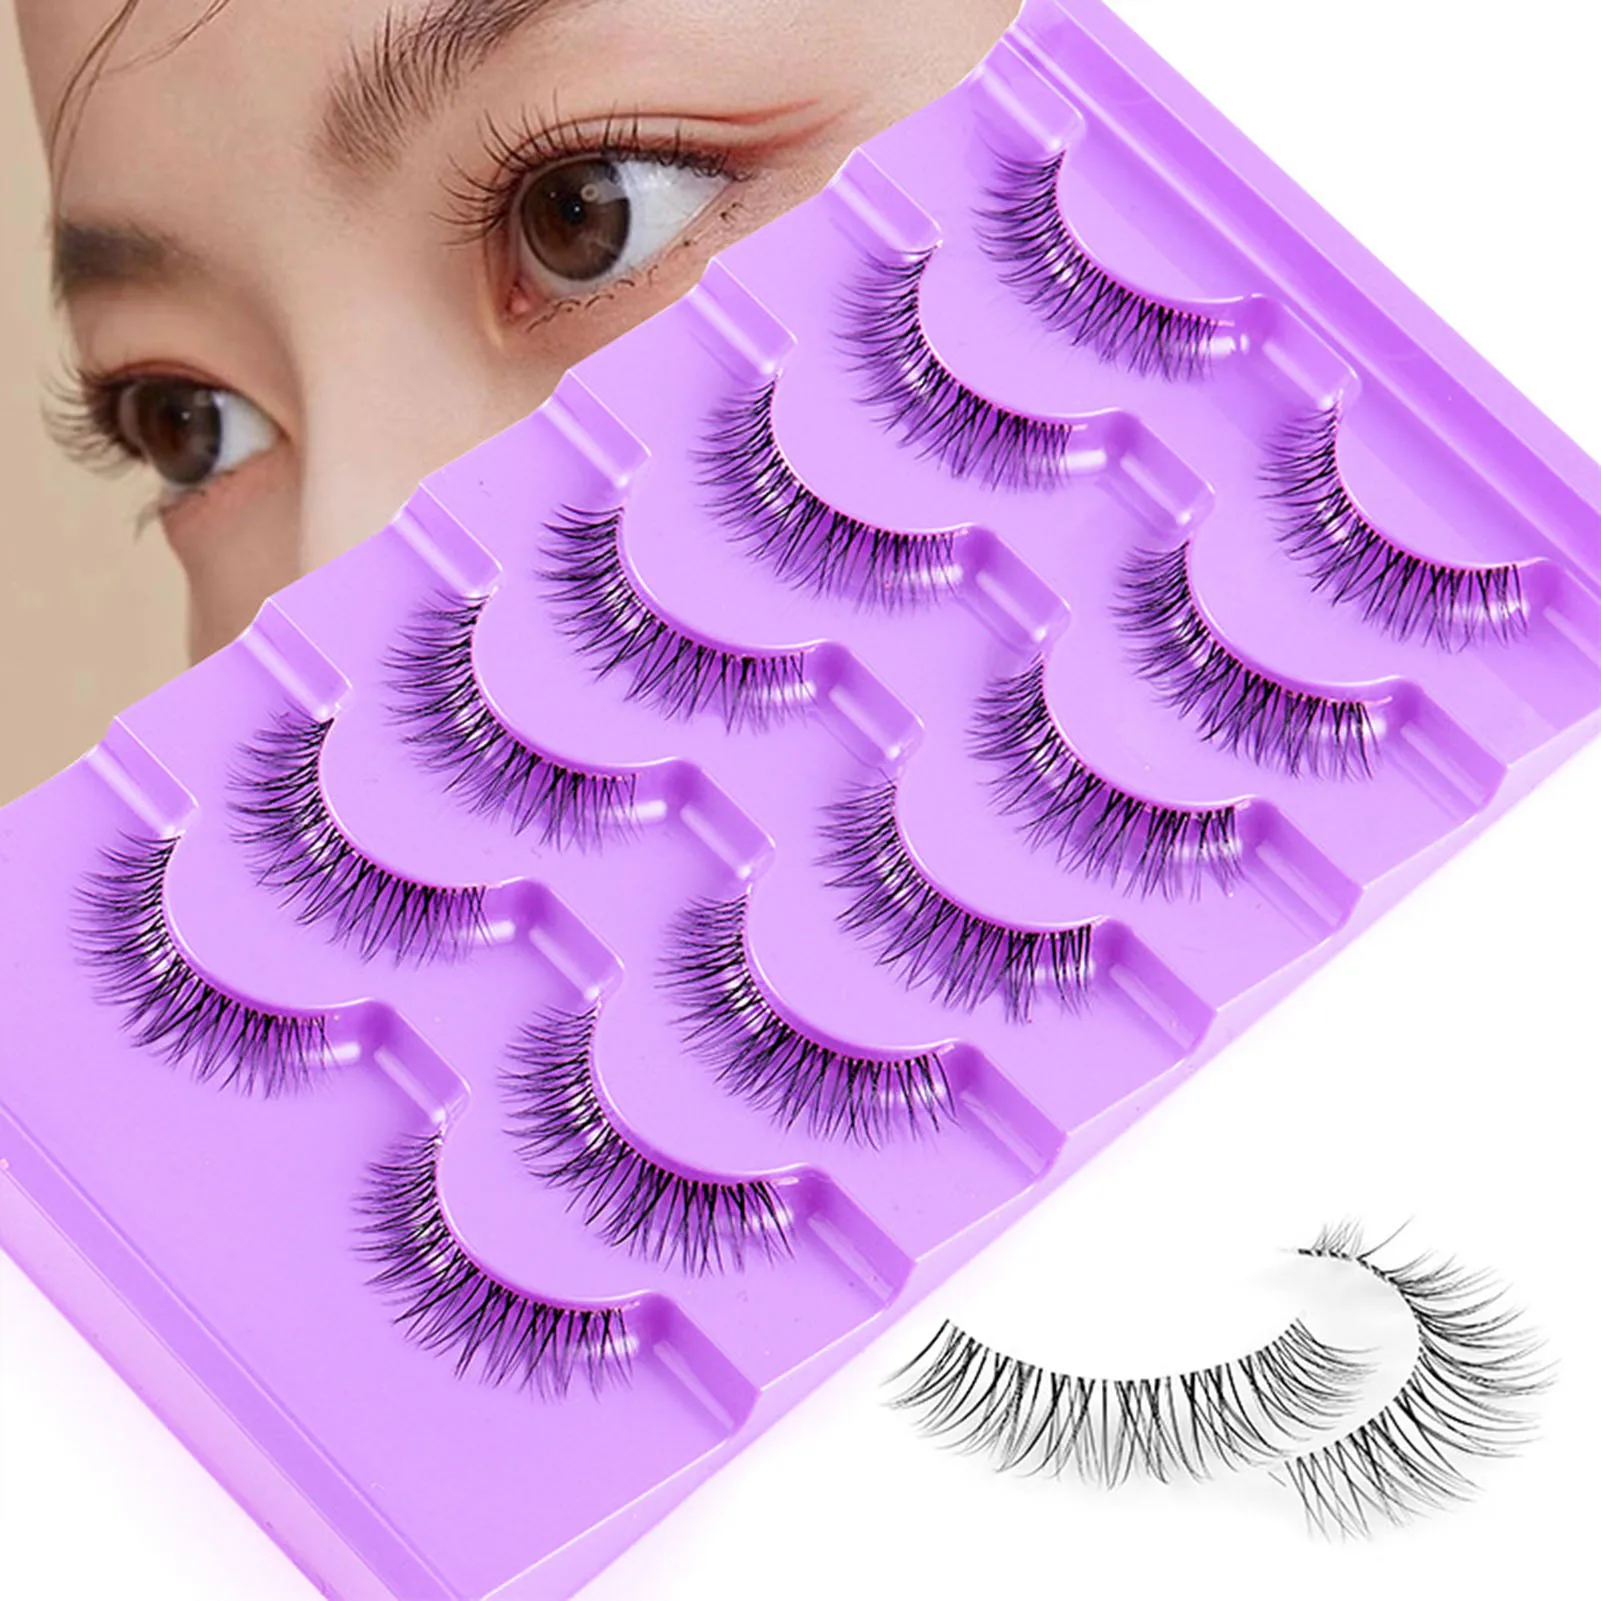 

7 Pairs Clear Band Grafting Eyelashes Soft Sharpened Tips Long Wispy Lashes for Cosplay Party Makeup PR Sale